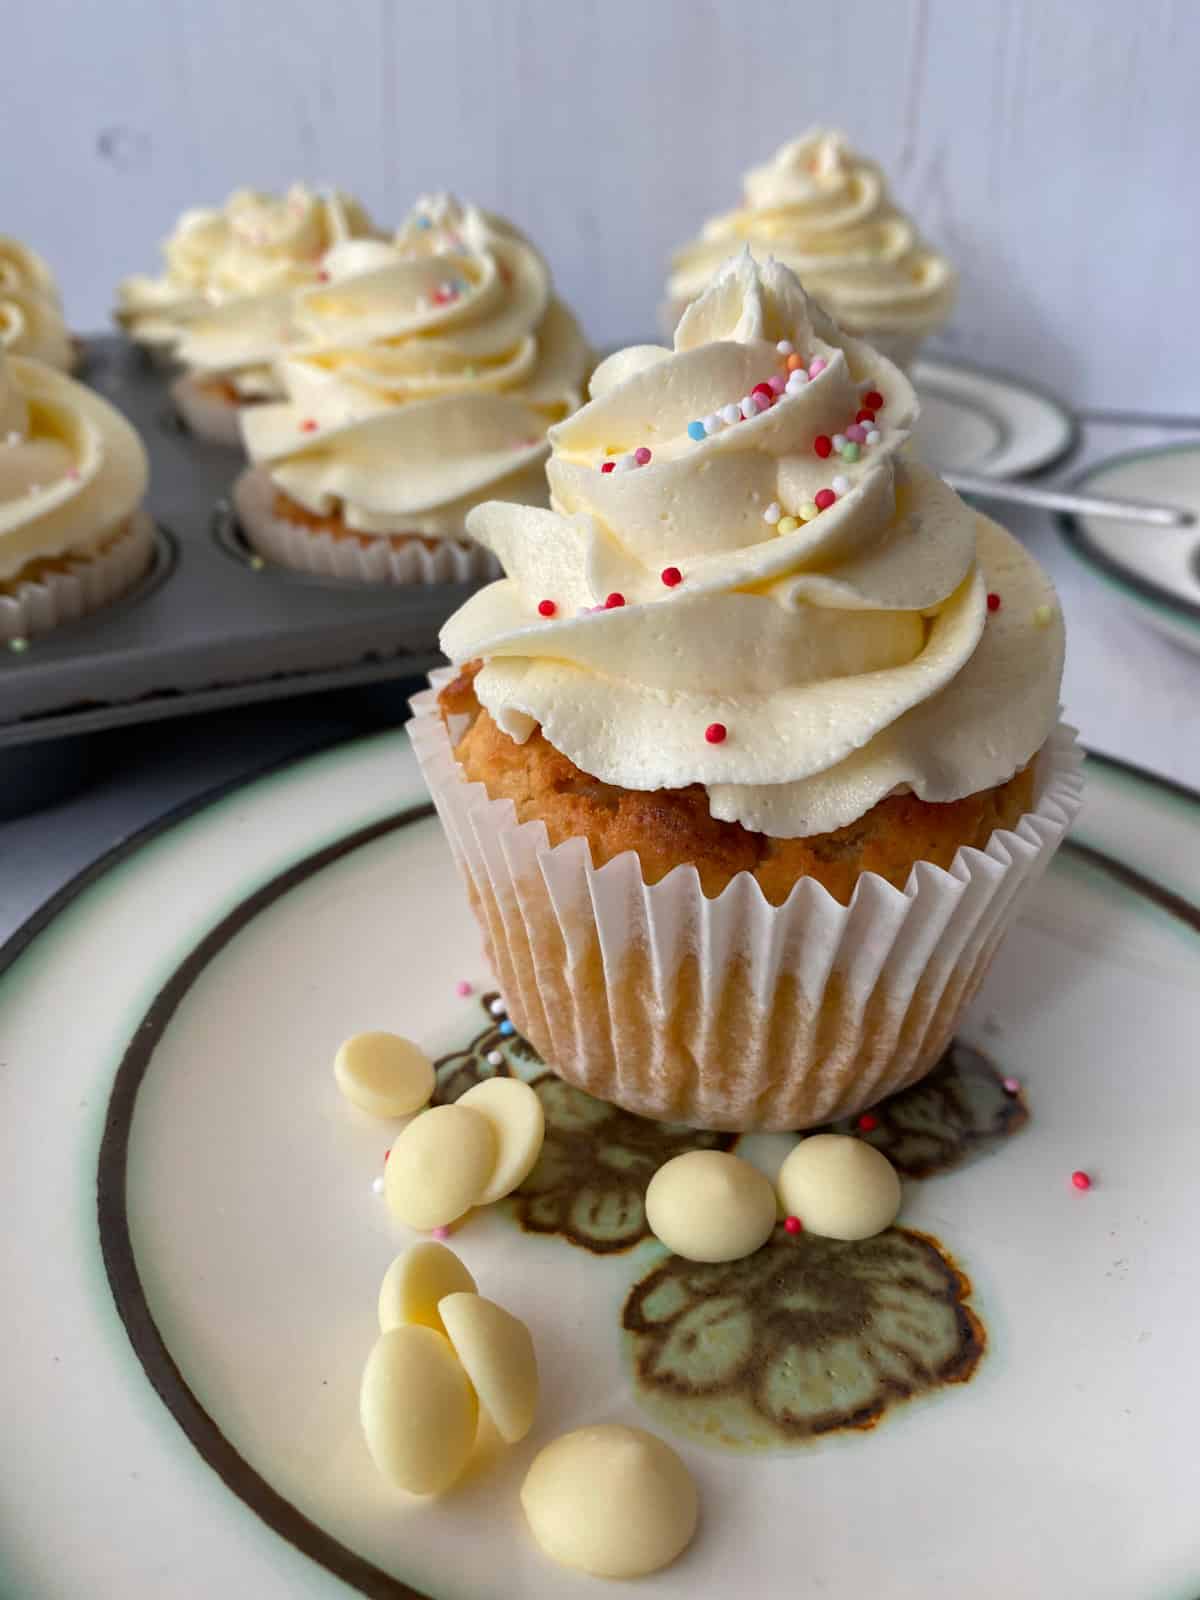 Muffin decorated with swirls of buttercream on a plate.